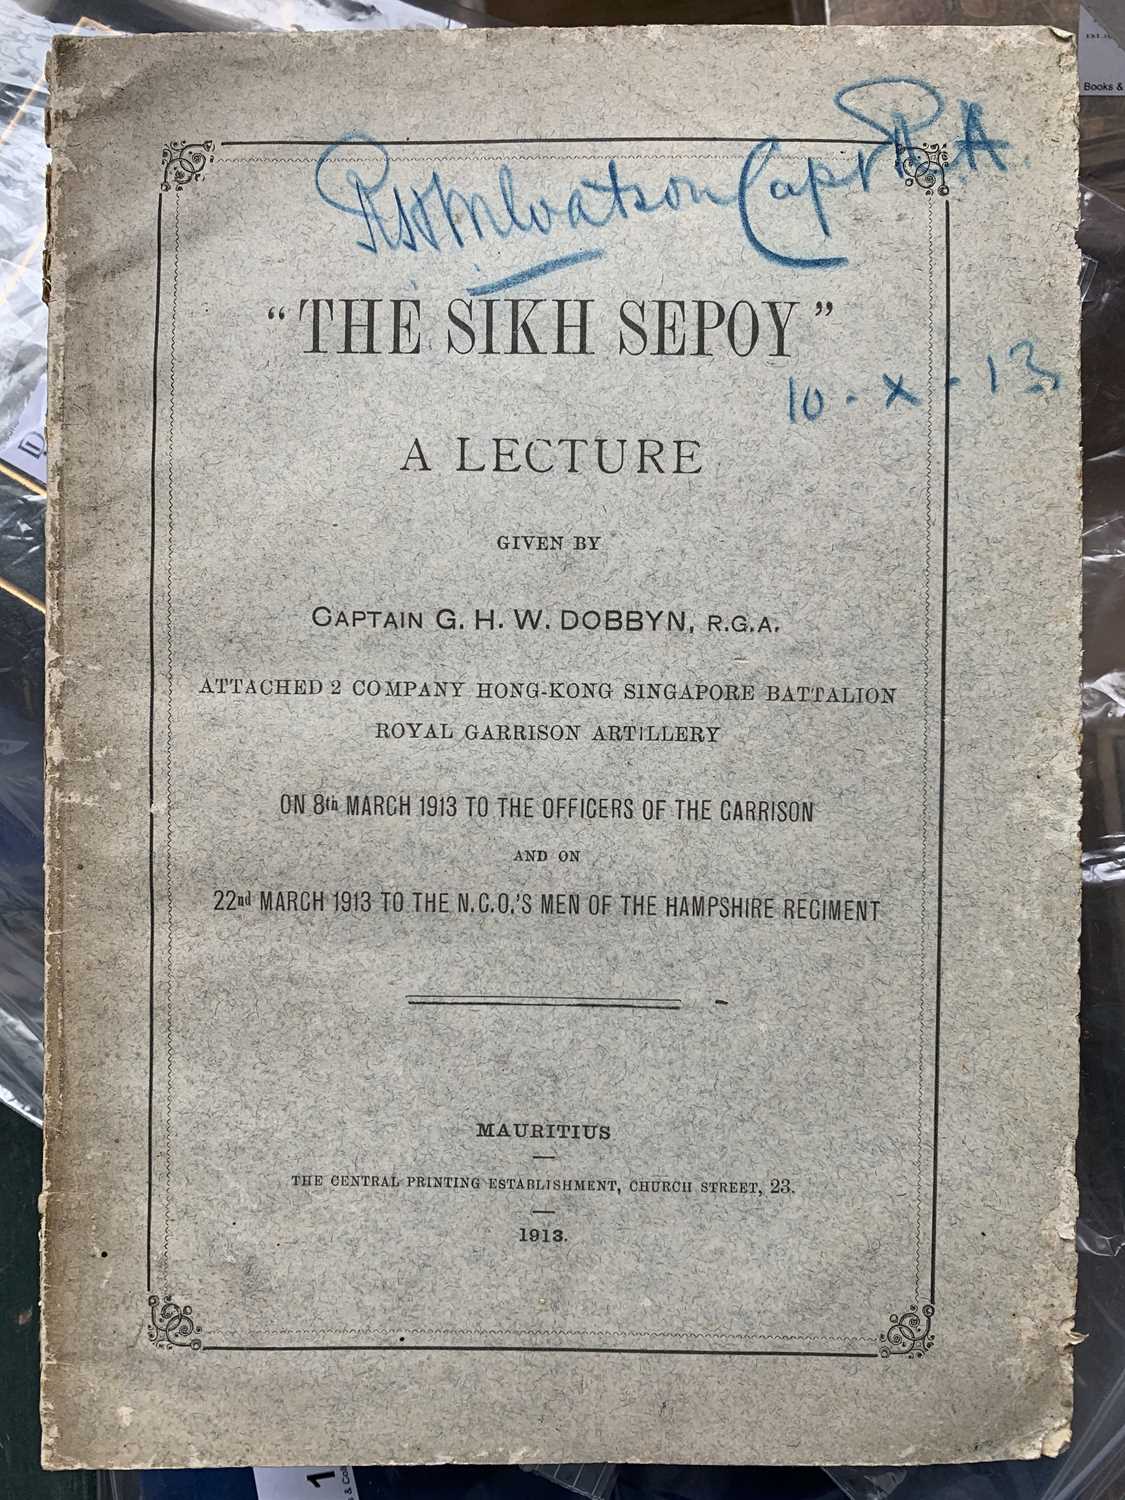 "The Sikh Sepoy." A lecture given by Captain G.H.W.Dobbyn, R. G. A. attached 2 Company Hong-Kong